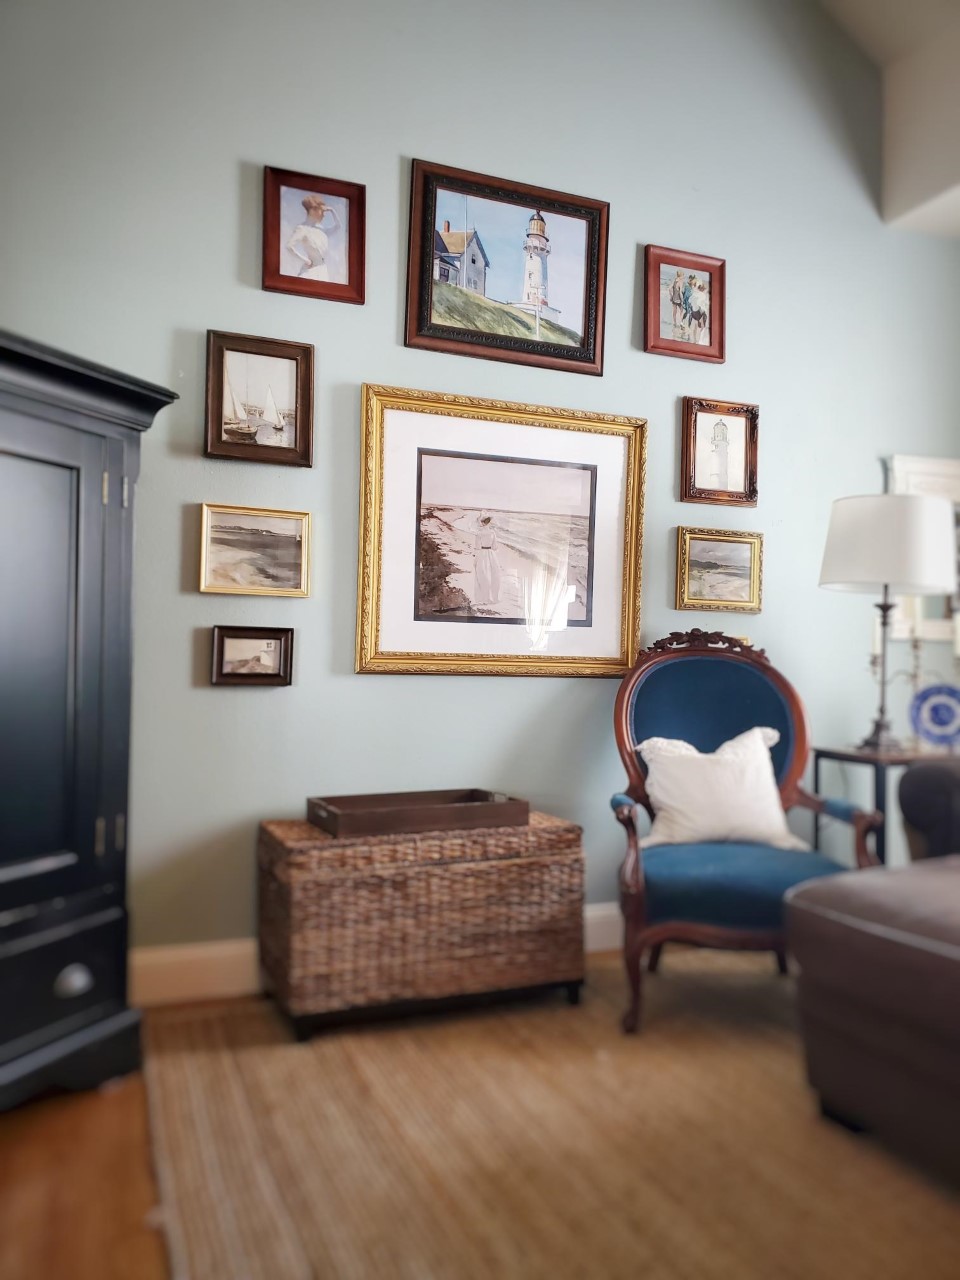 Gallery wall with blue prints that match the home decor of the living room.